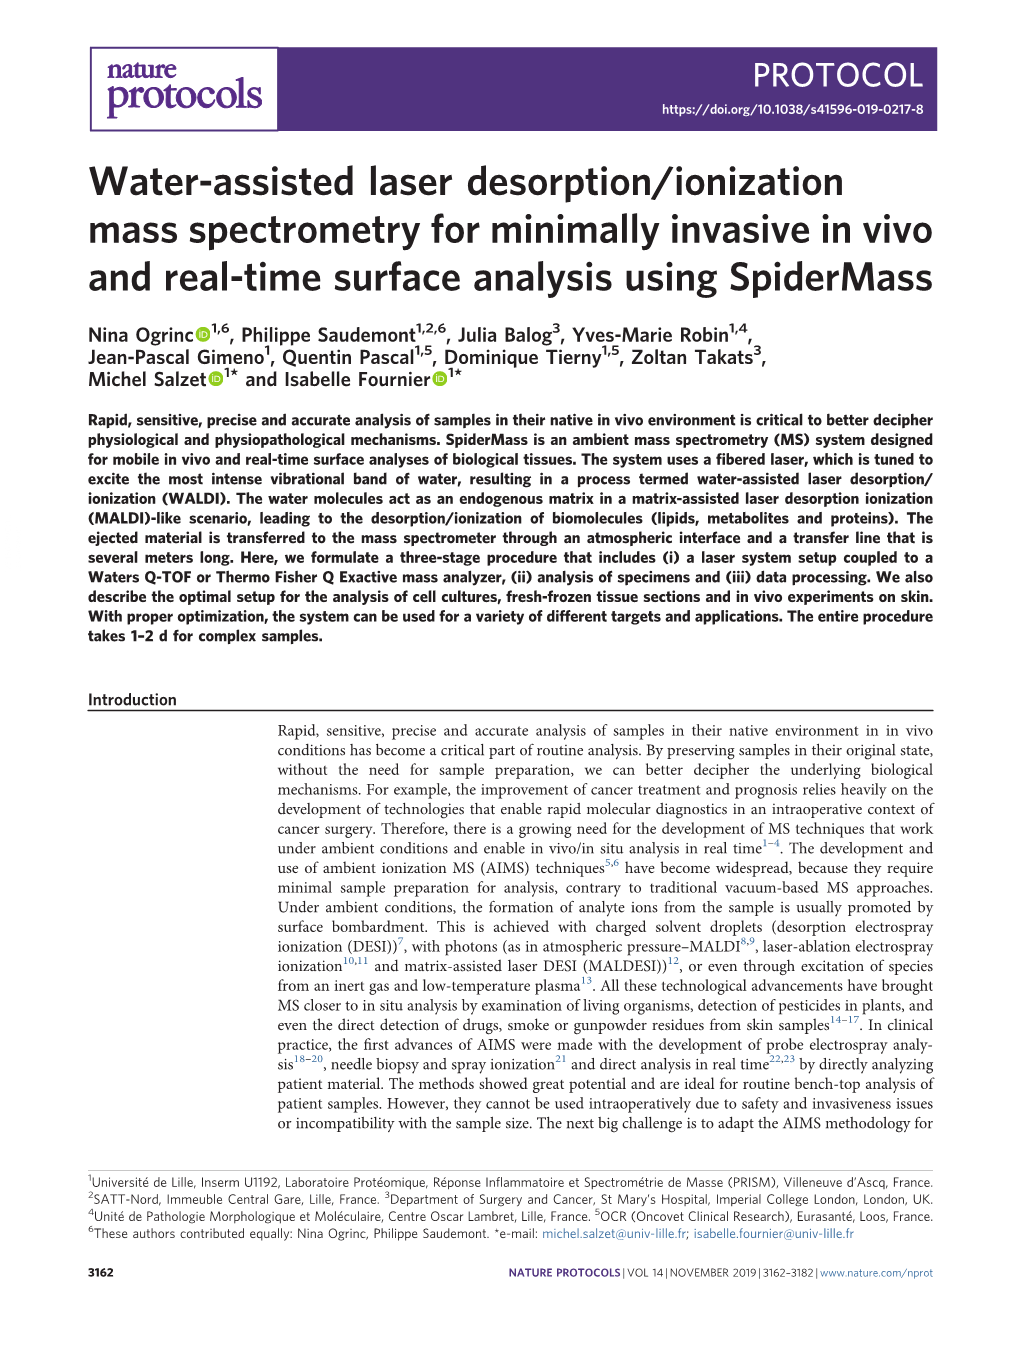 Water-Assisted Laser Desorption/Ionization Mass Spectrometry for Minimally Invasive in Vivo and Real-Time Surface Analysis Using Spidermass